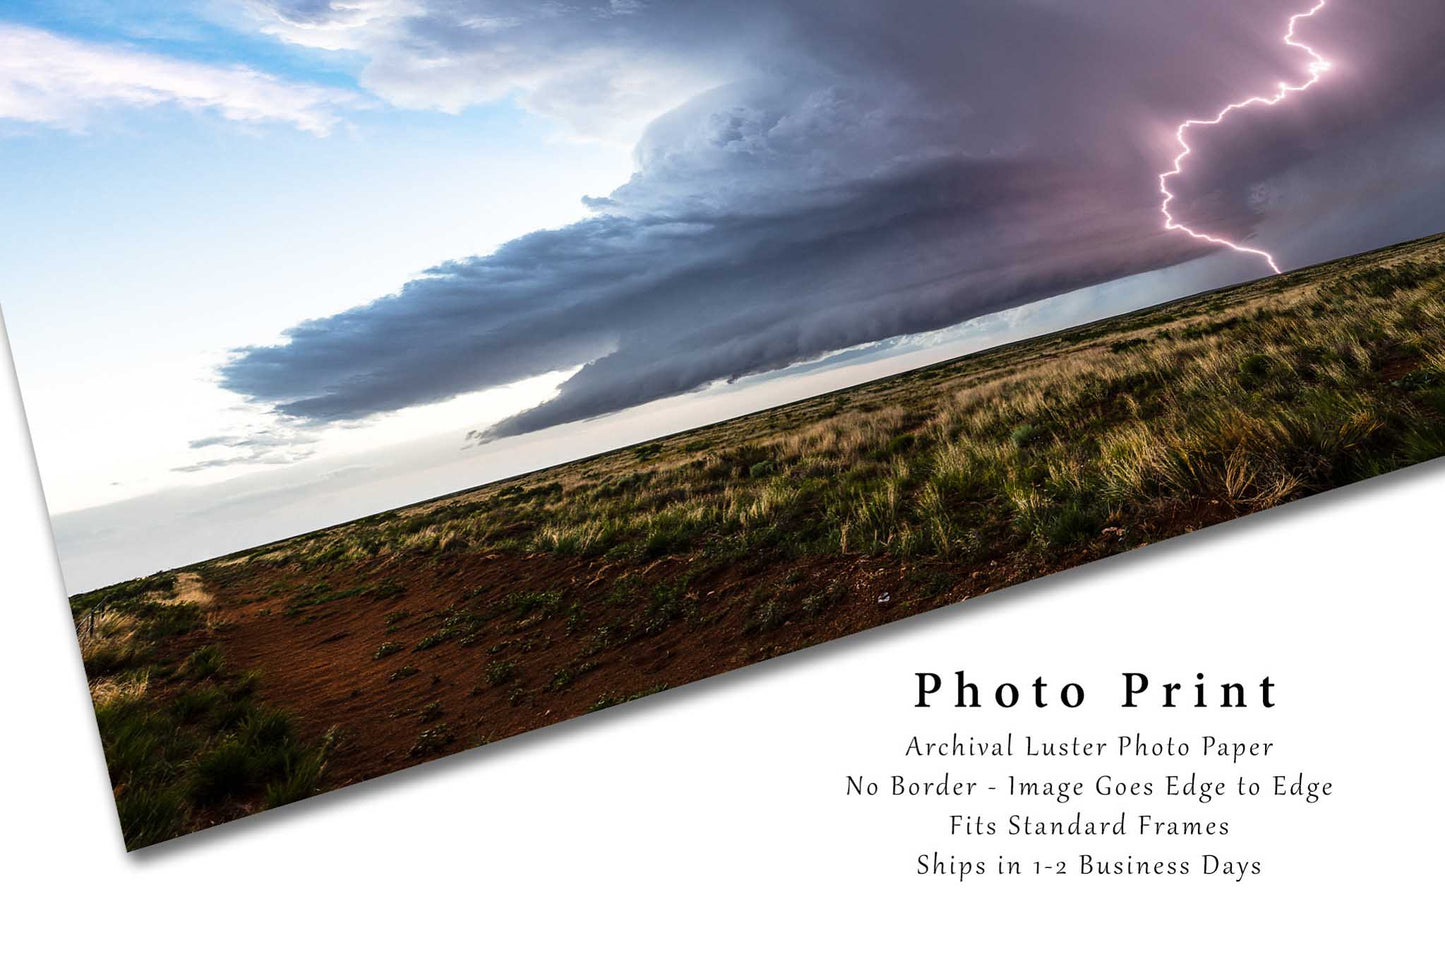 Storm Photography Print - Picture of Supercell Thunderstorm and Lightning Bolt Over High Desert in New Mexico Weather Wall Art Nature Decor